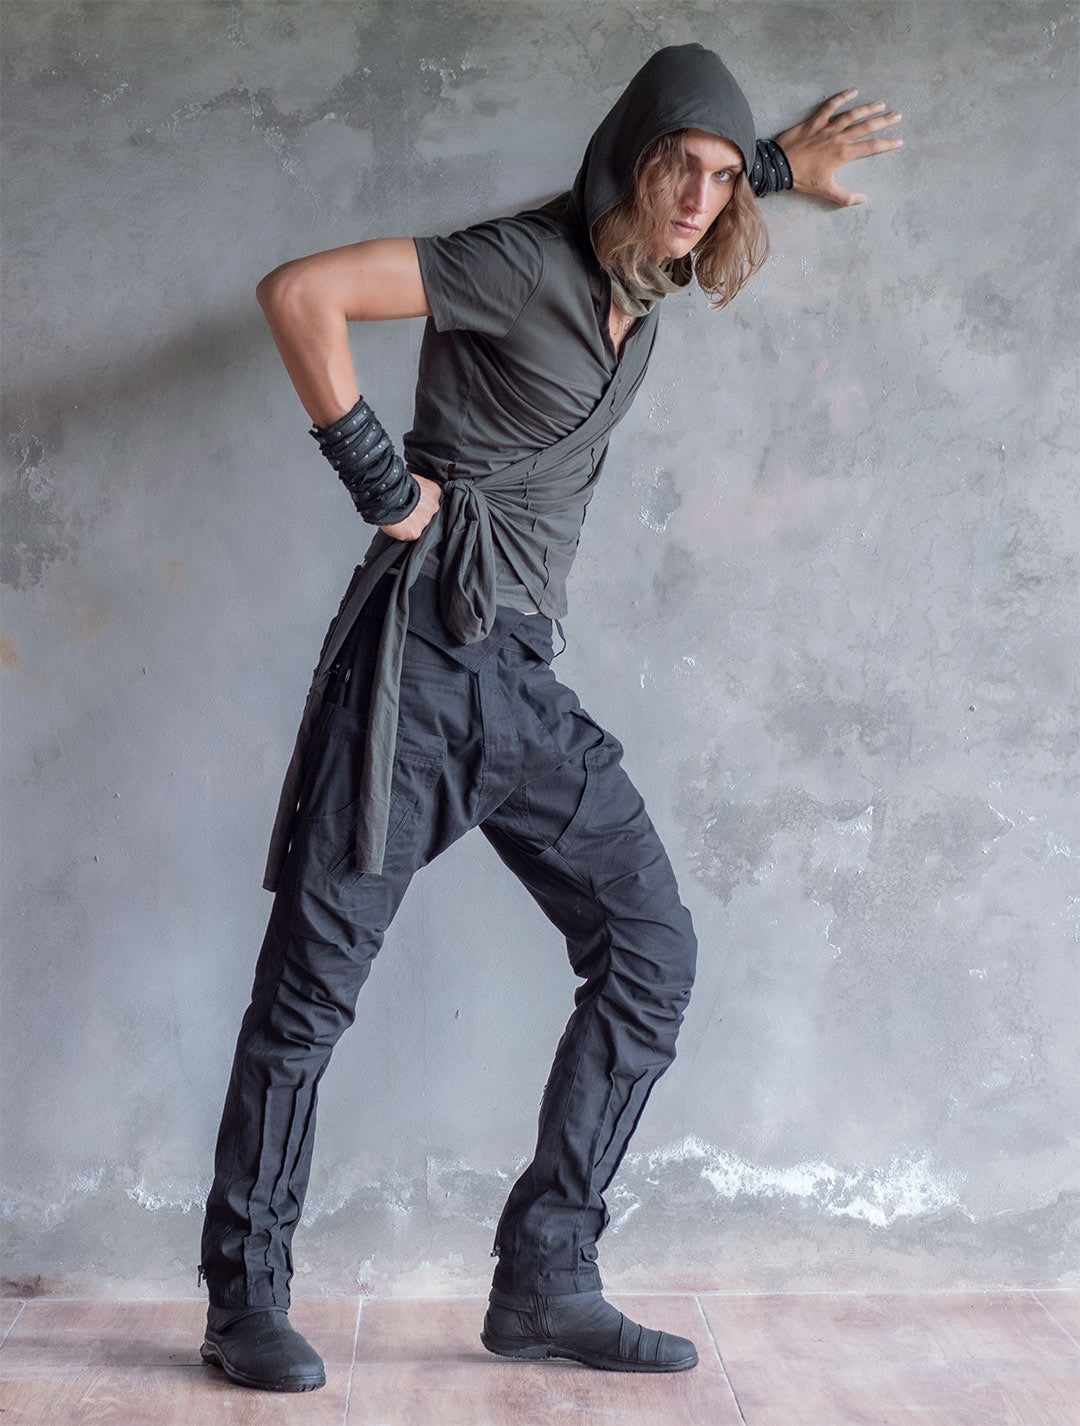 MENS BAGGY TROUSERS Loose Fit Hippy Cotton Psytrance Festival Party Goa Eco  Fashion Fairtrade Ethical -  Norway